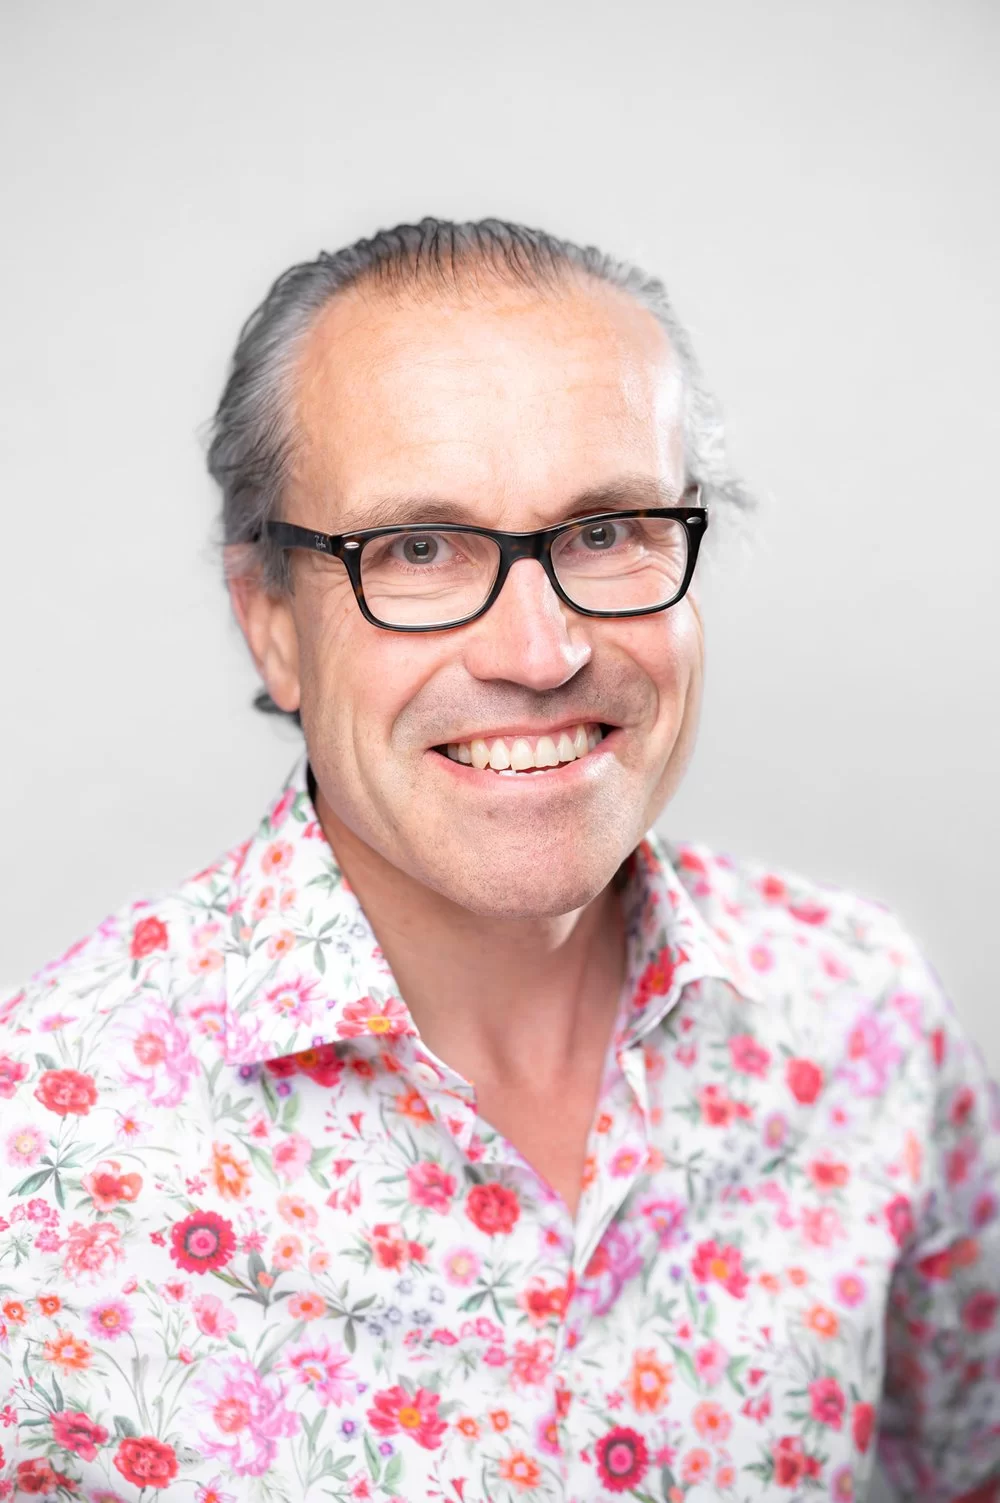 Will Ramsay, founder of the Affordable Art Fair, smiling at the camera in a white and pink floral shirt.